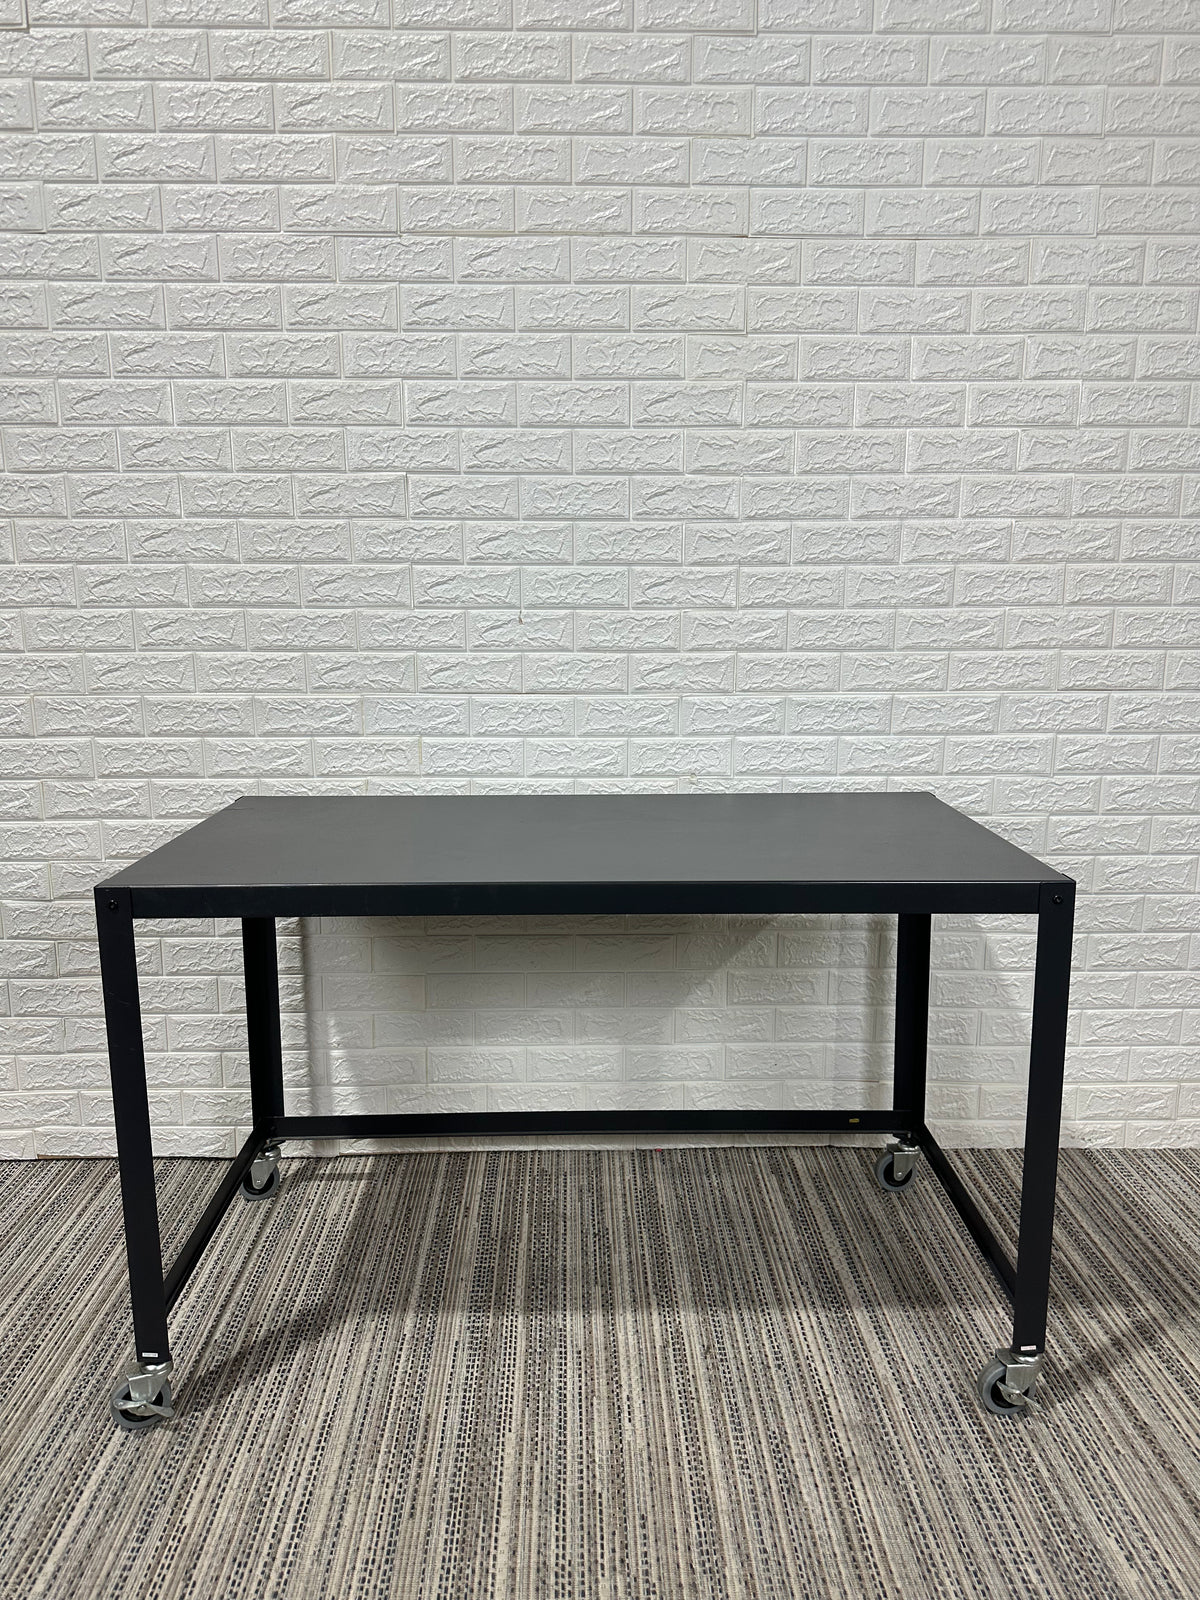 Pre-Owned Small Metal Rolling Cart - Duckys Office Furniture